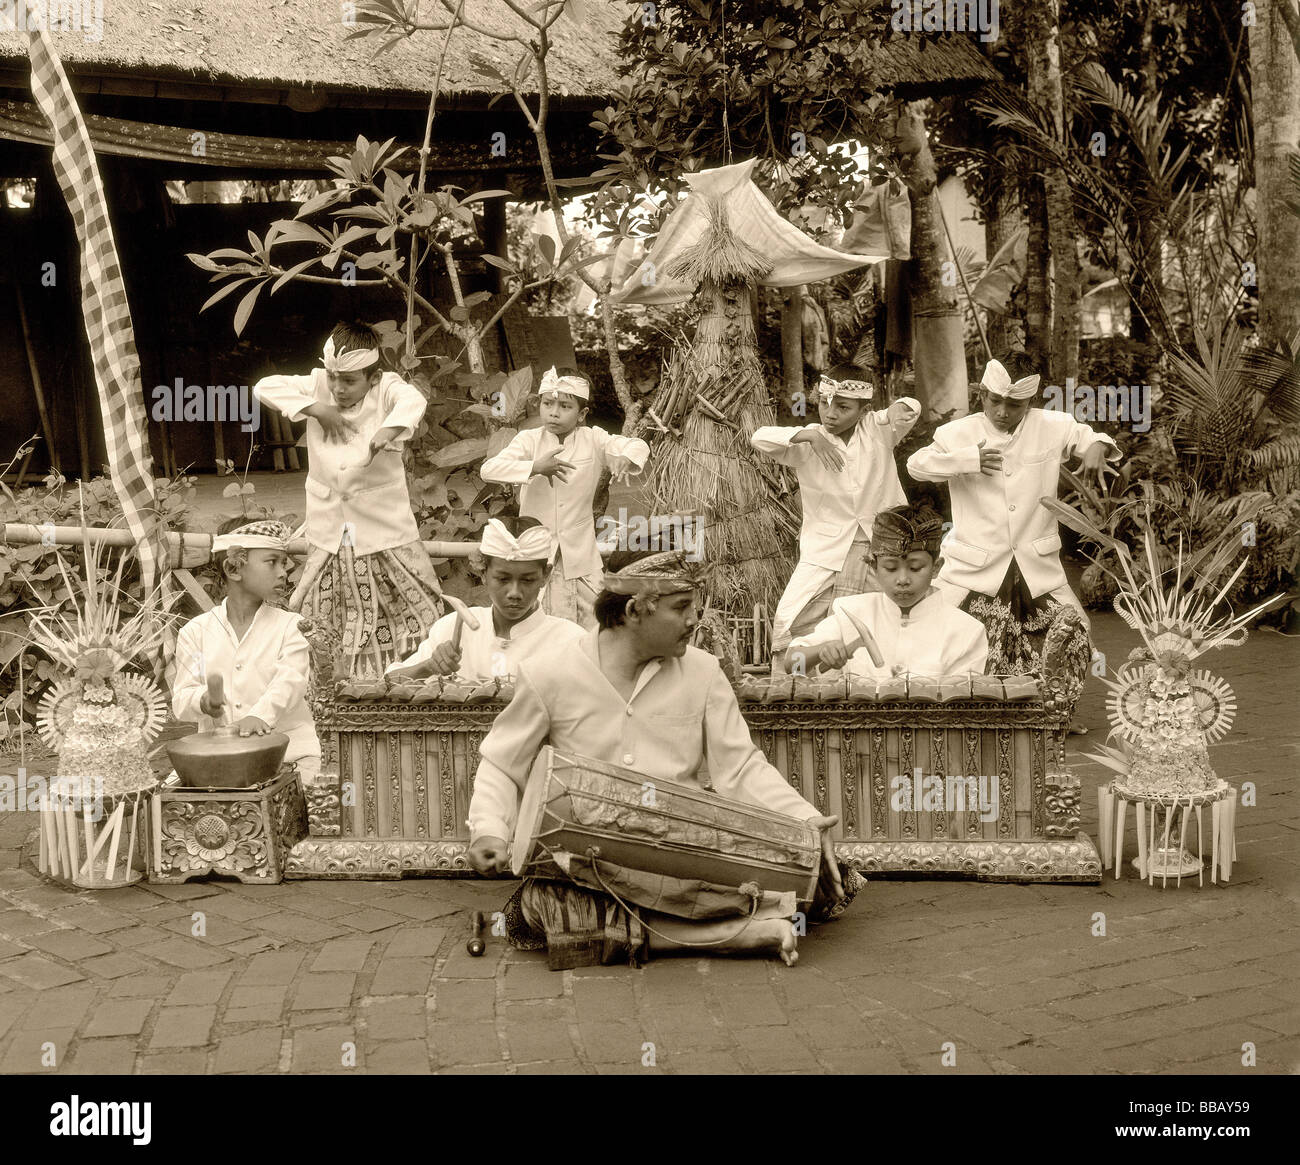 Indonesia, Bali, man playing hand drum, young boy dancers in traditional costume Stock Photo